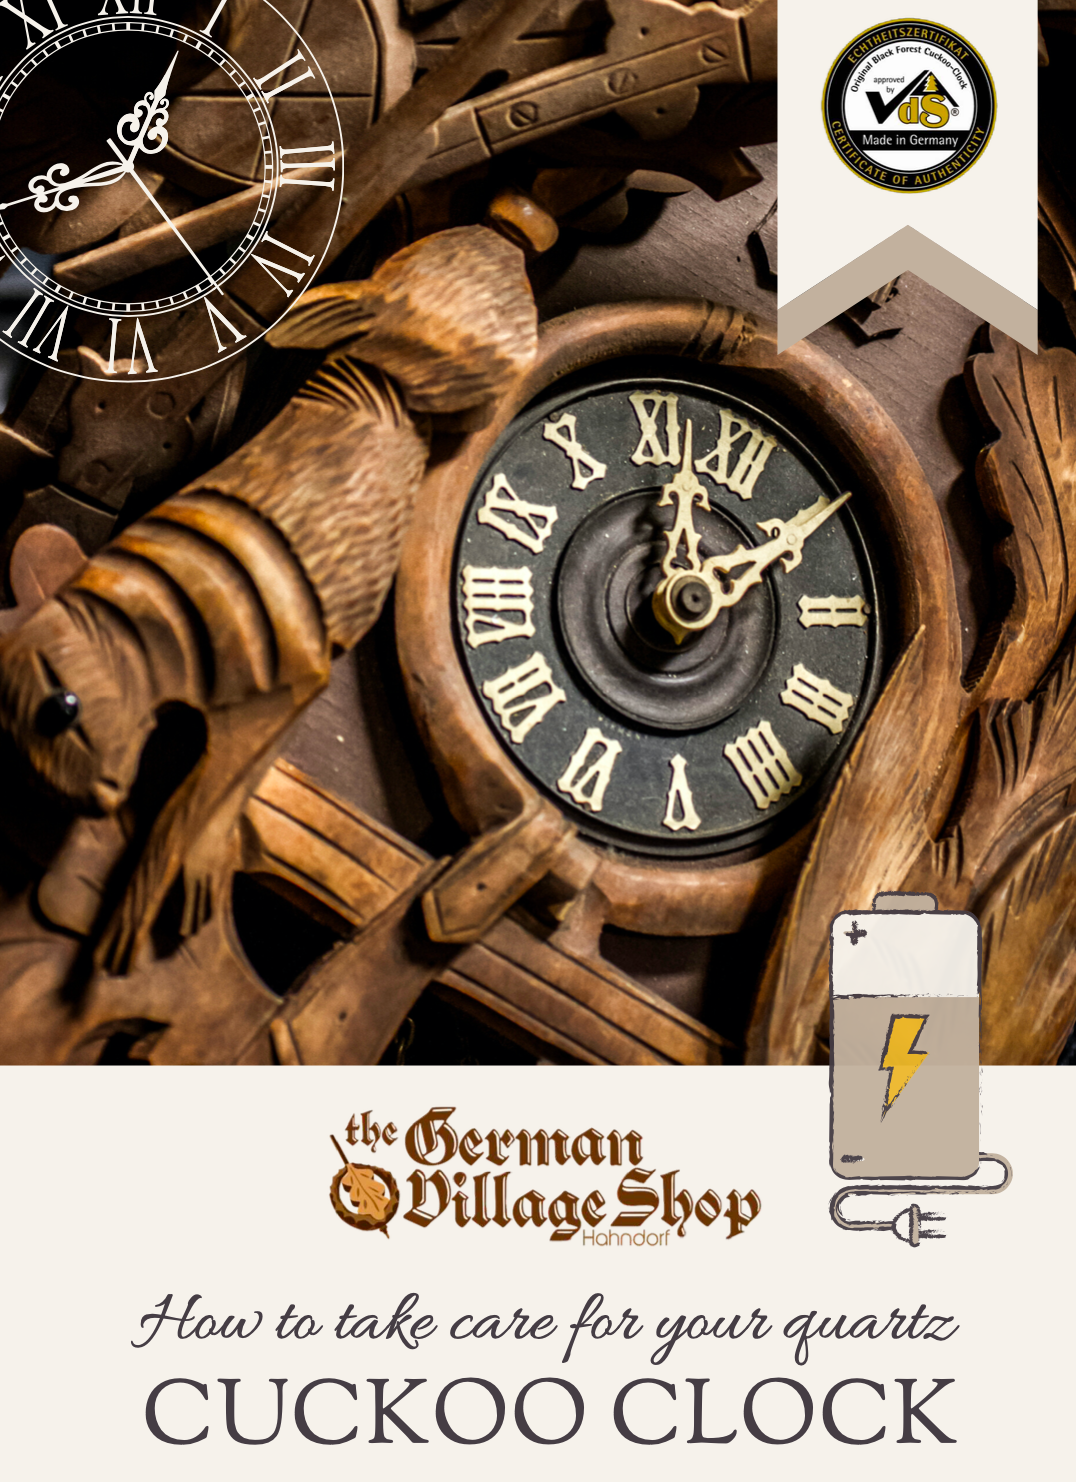 Battery operated Cuckoo Clock care PDF from The German Village Shop